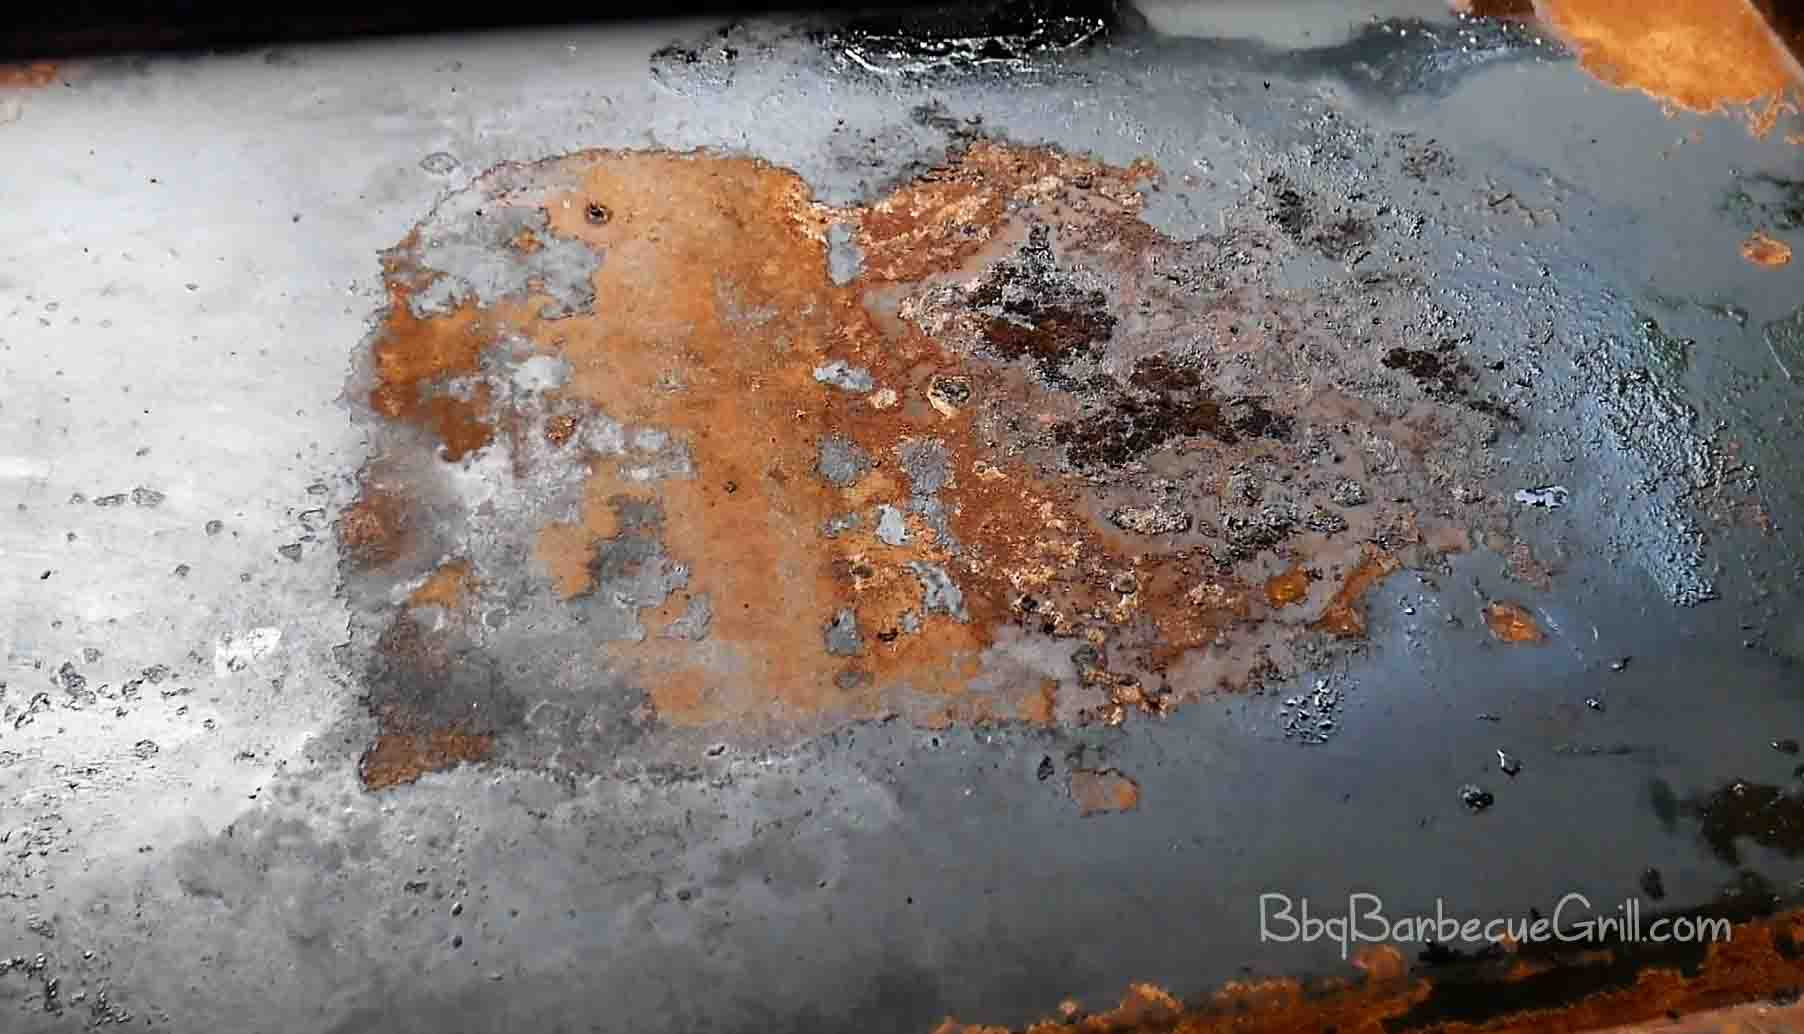 How to remove rust from blackstone griddle